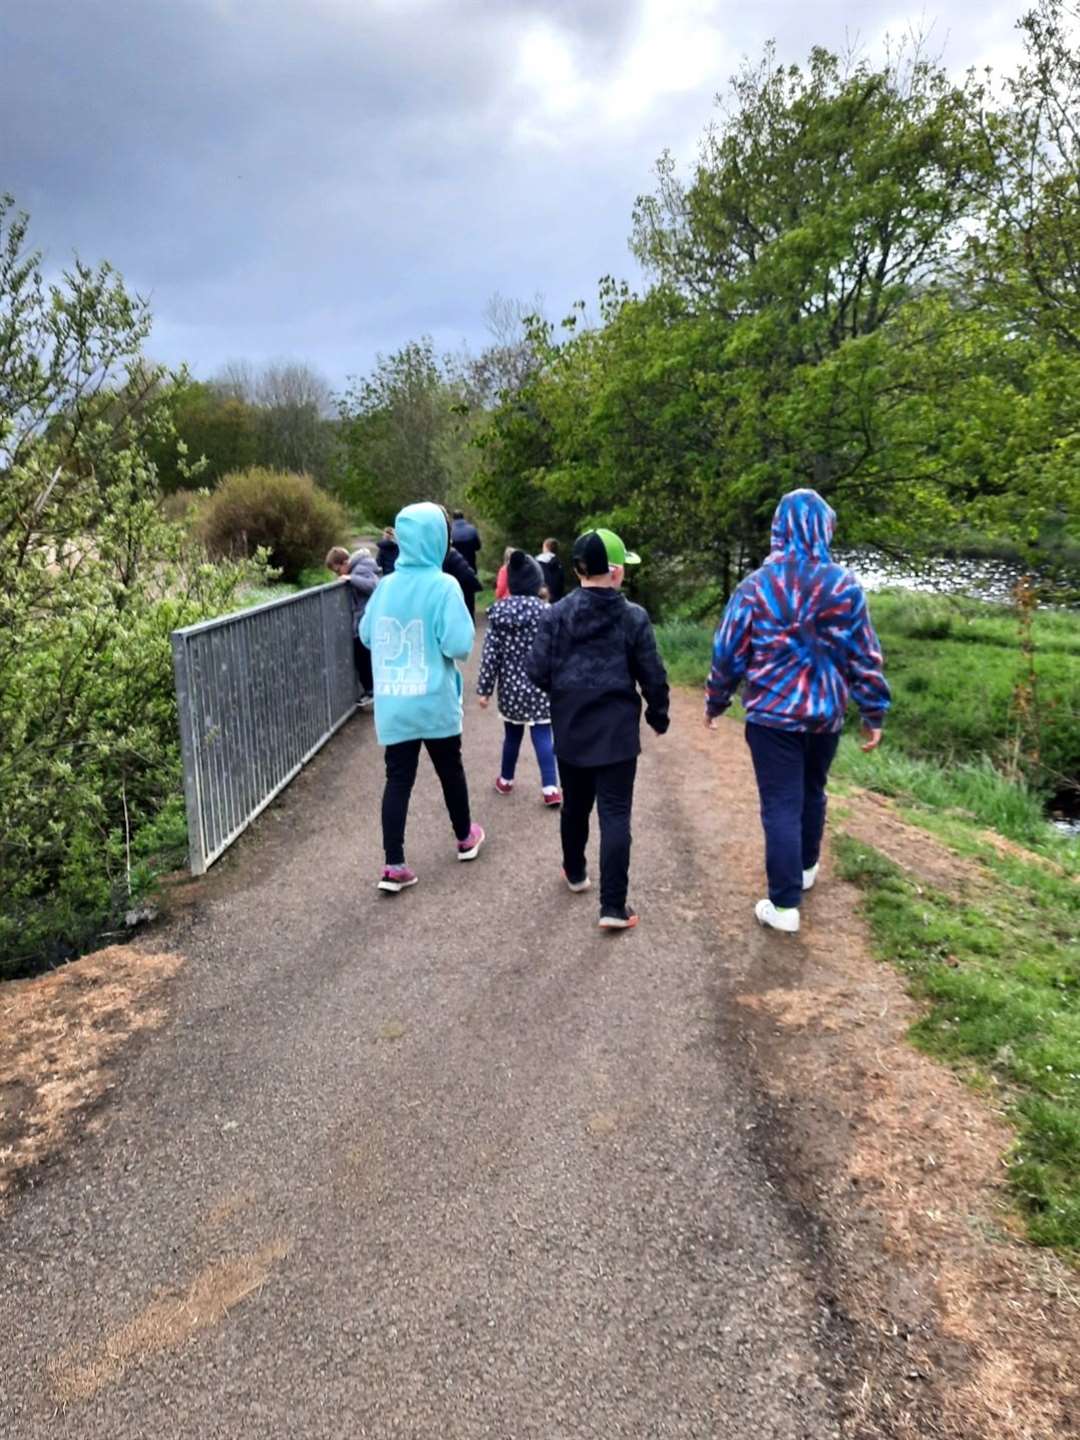 Children in the Fun, Young and Involved (FYI) group enjoyed exploring in the trees and collecting sticky willows during an outdoor session near the boating pond in Thurso at the weekend.